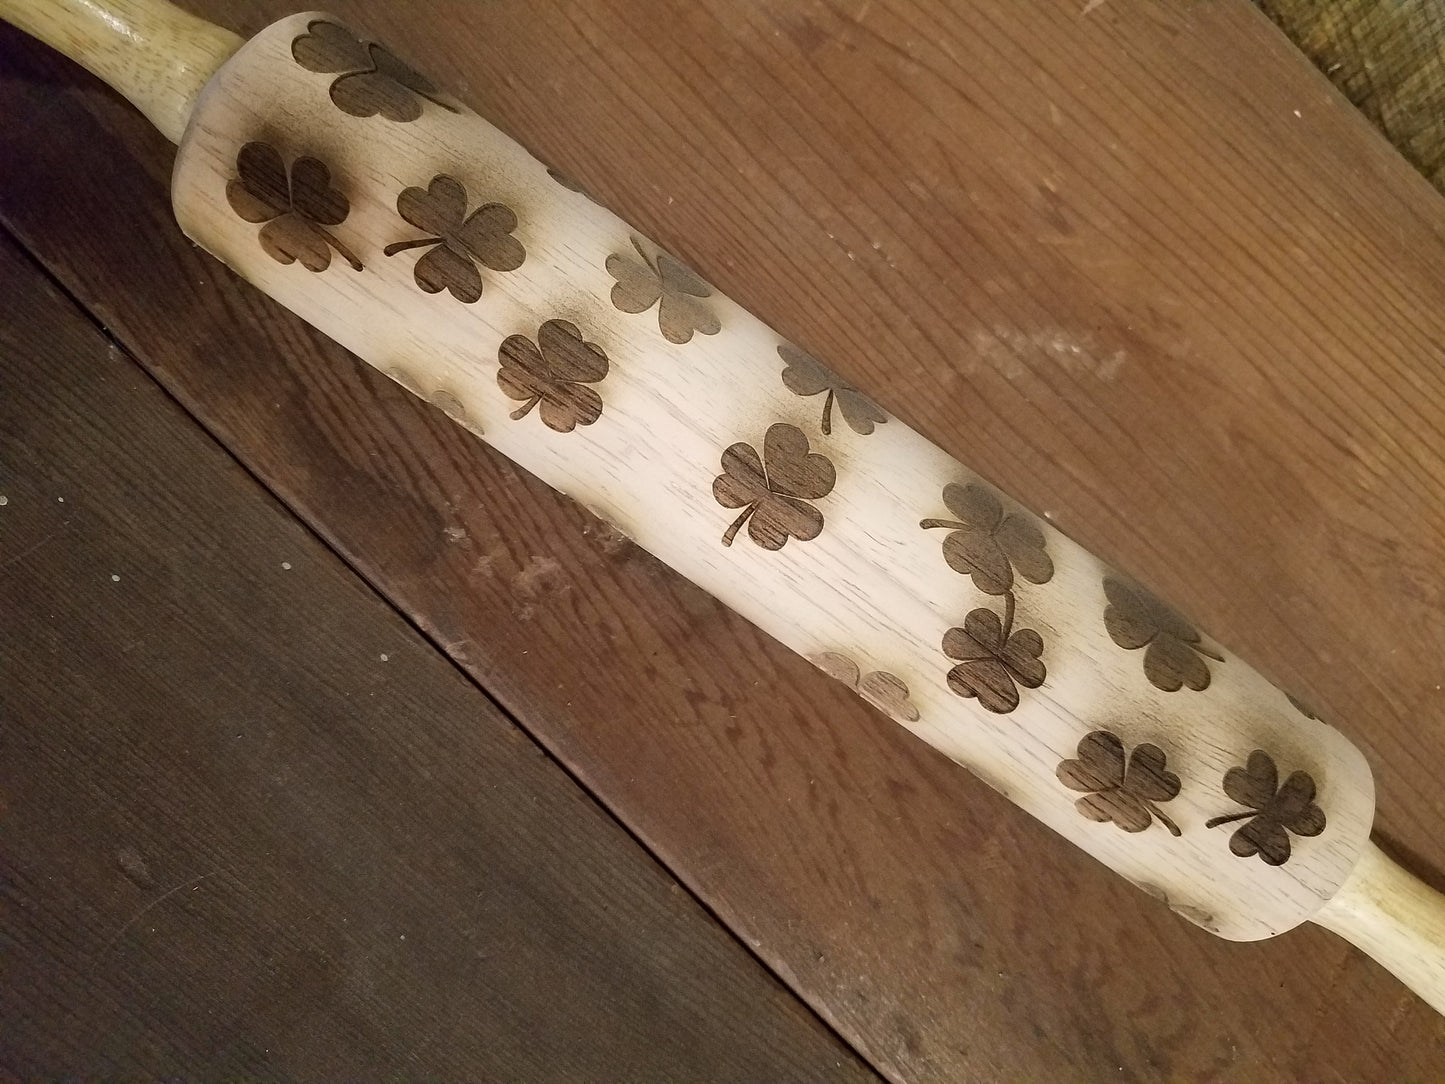 Shamrock, Four Leaf Clover, Lucky, Irish, St Patricks Day,  10 Inch Rolling Pin, Pie Crust, Gift, Embossed, Engraved, Wood, Cookie Stamp